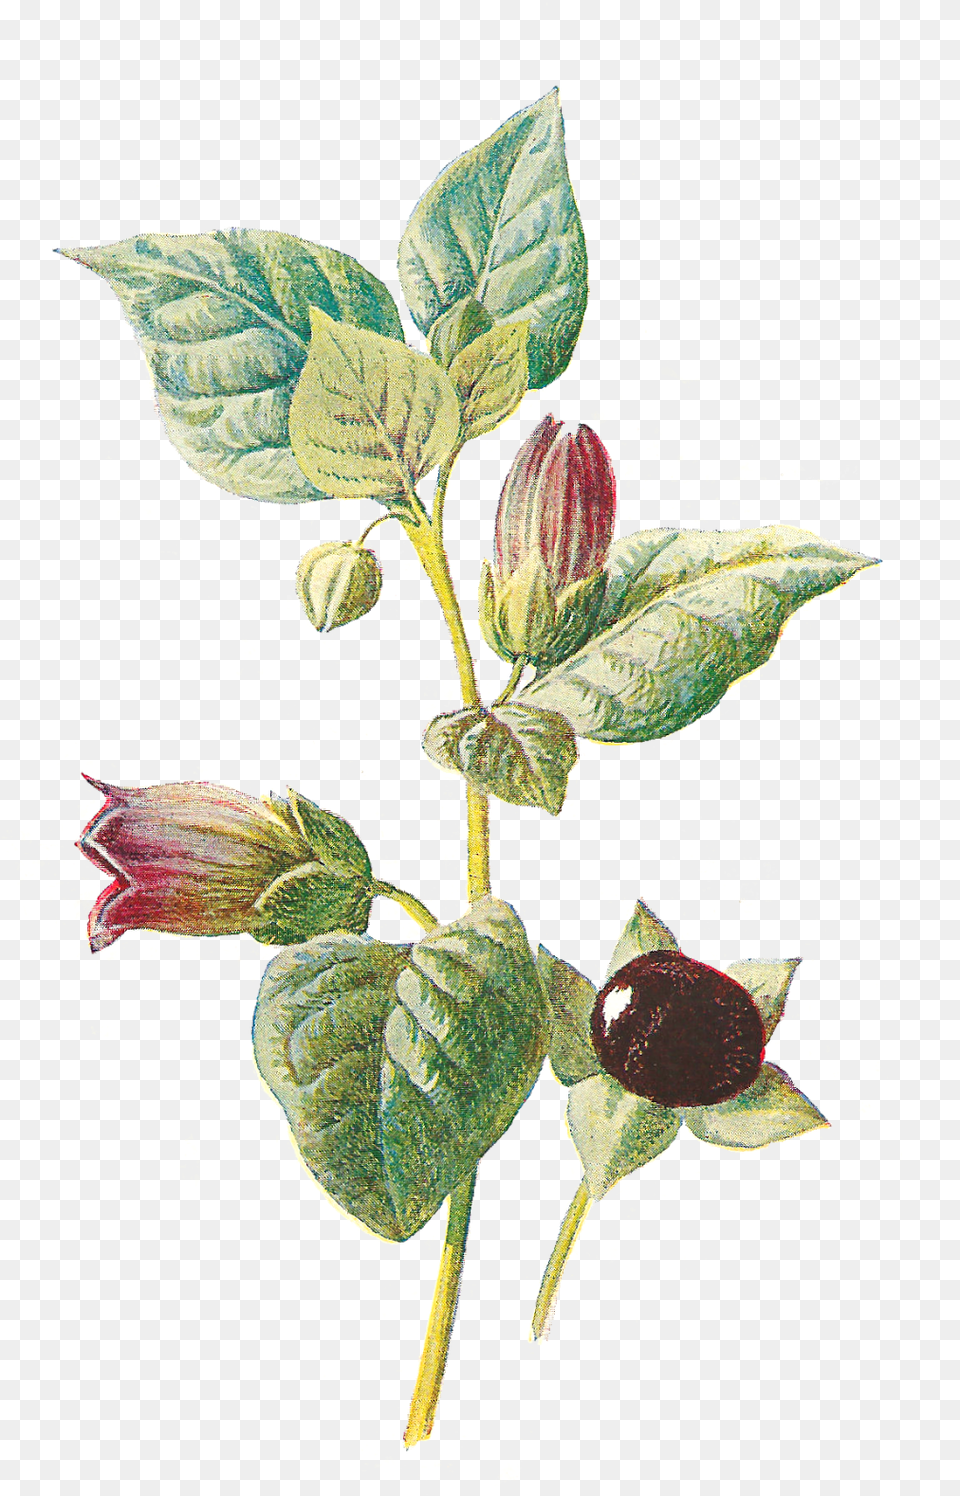 Flower Wildflower Deadly Nightshade Image Illustration Deadly Nightshade Flower Illustration, Acanthaceae, Sprout, Plant, Leaf Png